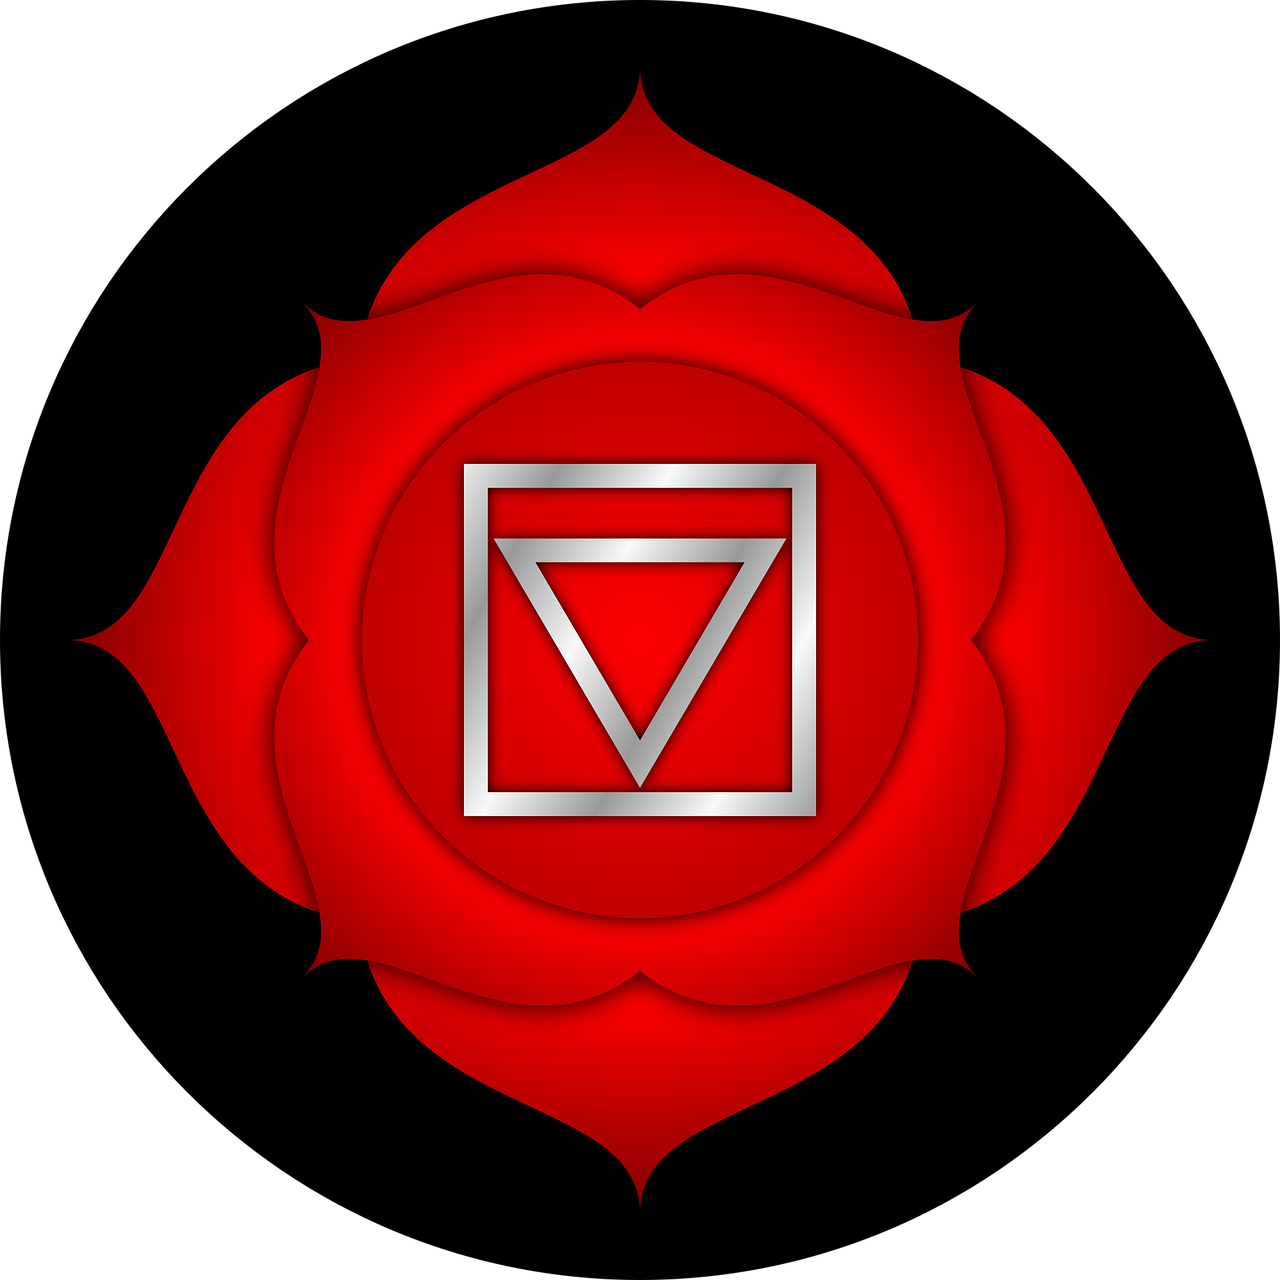 An illustration of the root chakra symbol.